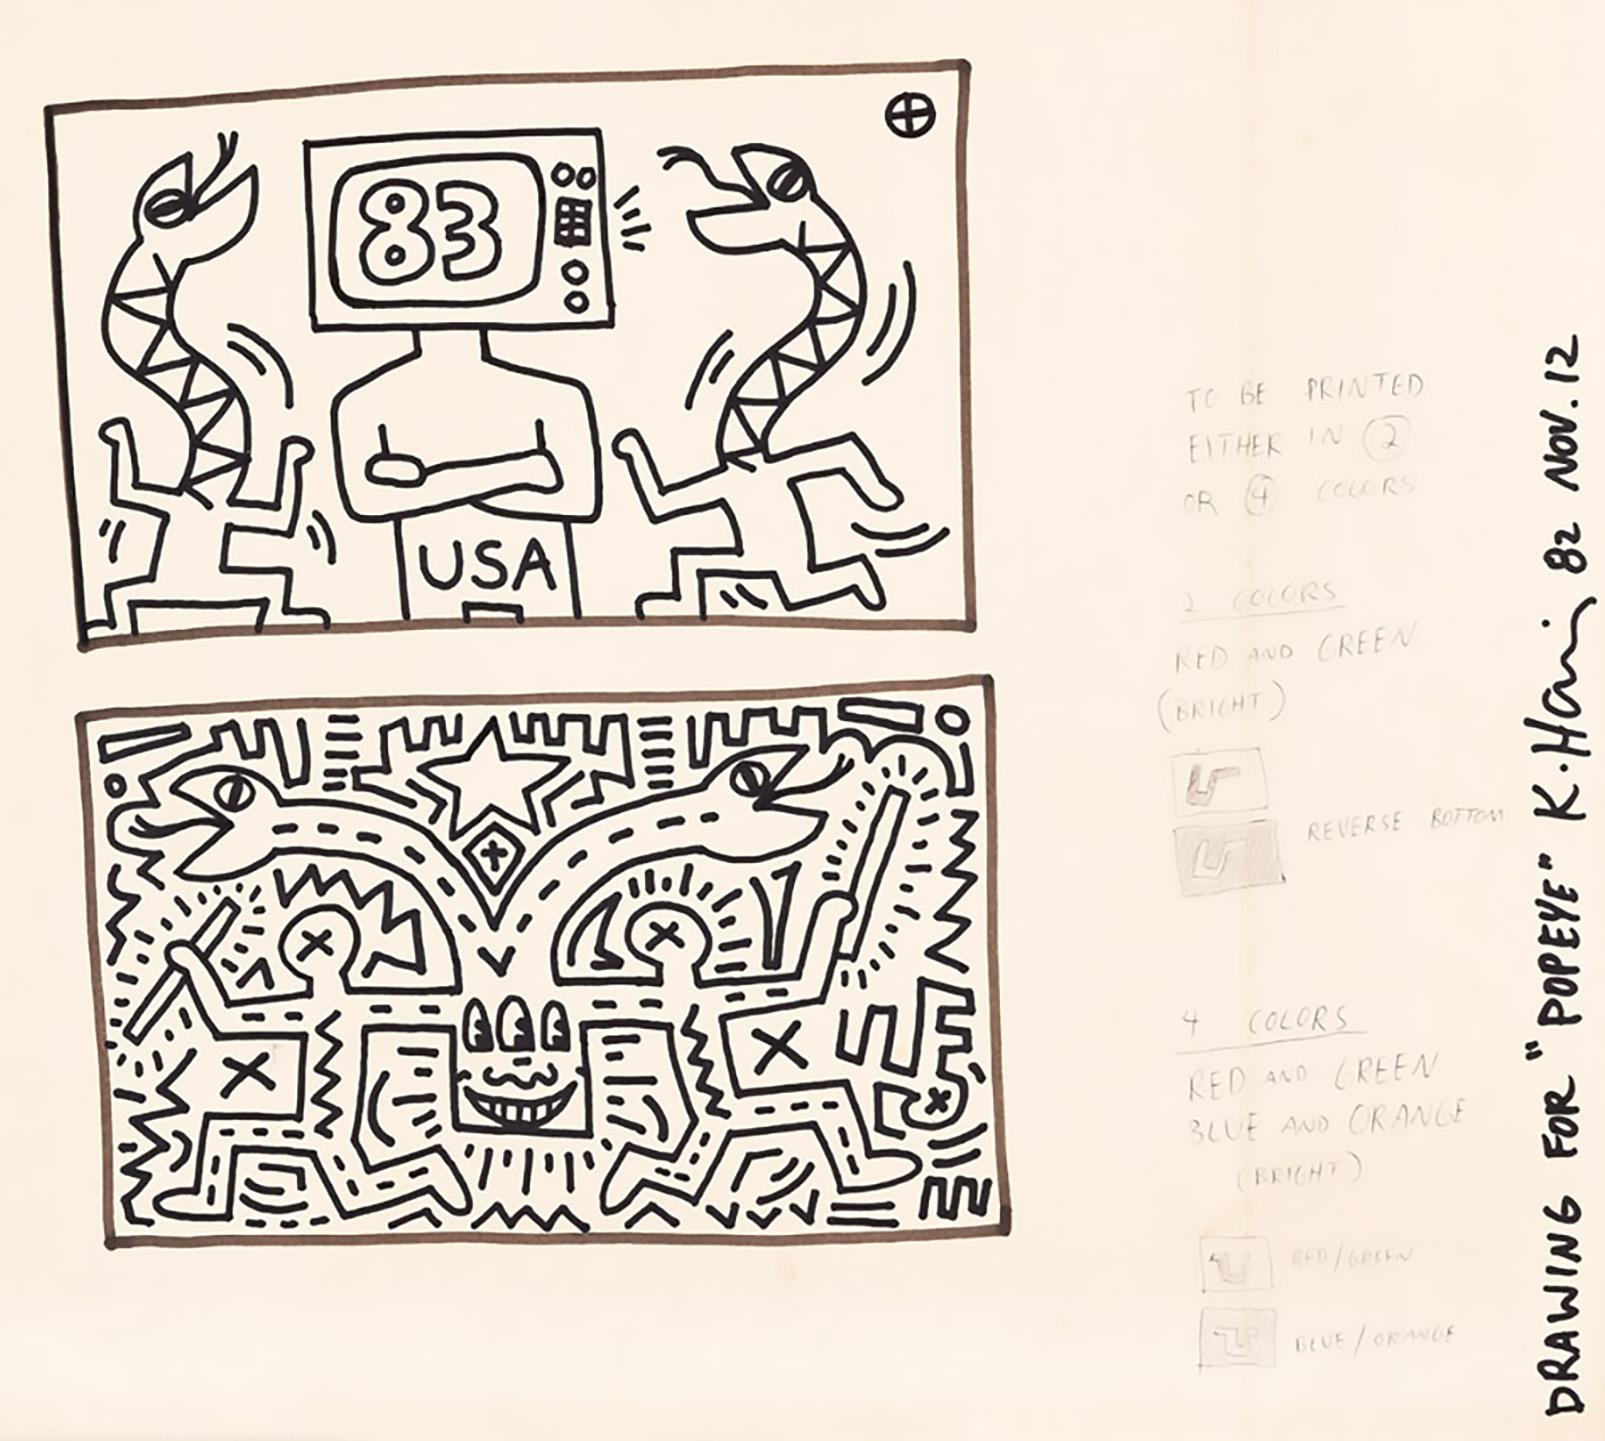 Keith Haring drawing Japan 1982:
Keith Haring executed this rare double drawing during his key breakout year of 1982 on behalf of the historic Japanese pop cultural publication: Popeye. 

The work emanates from the personal collection of a Popeye